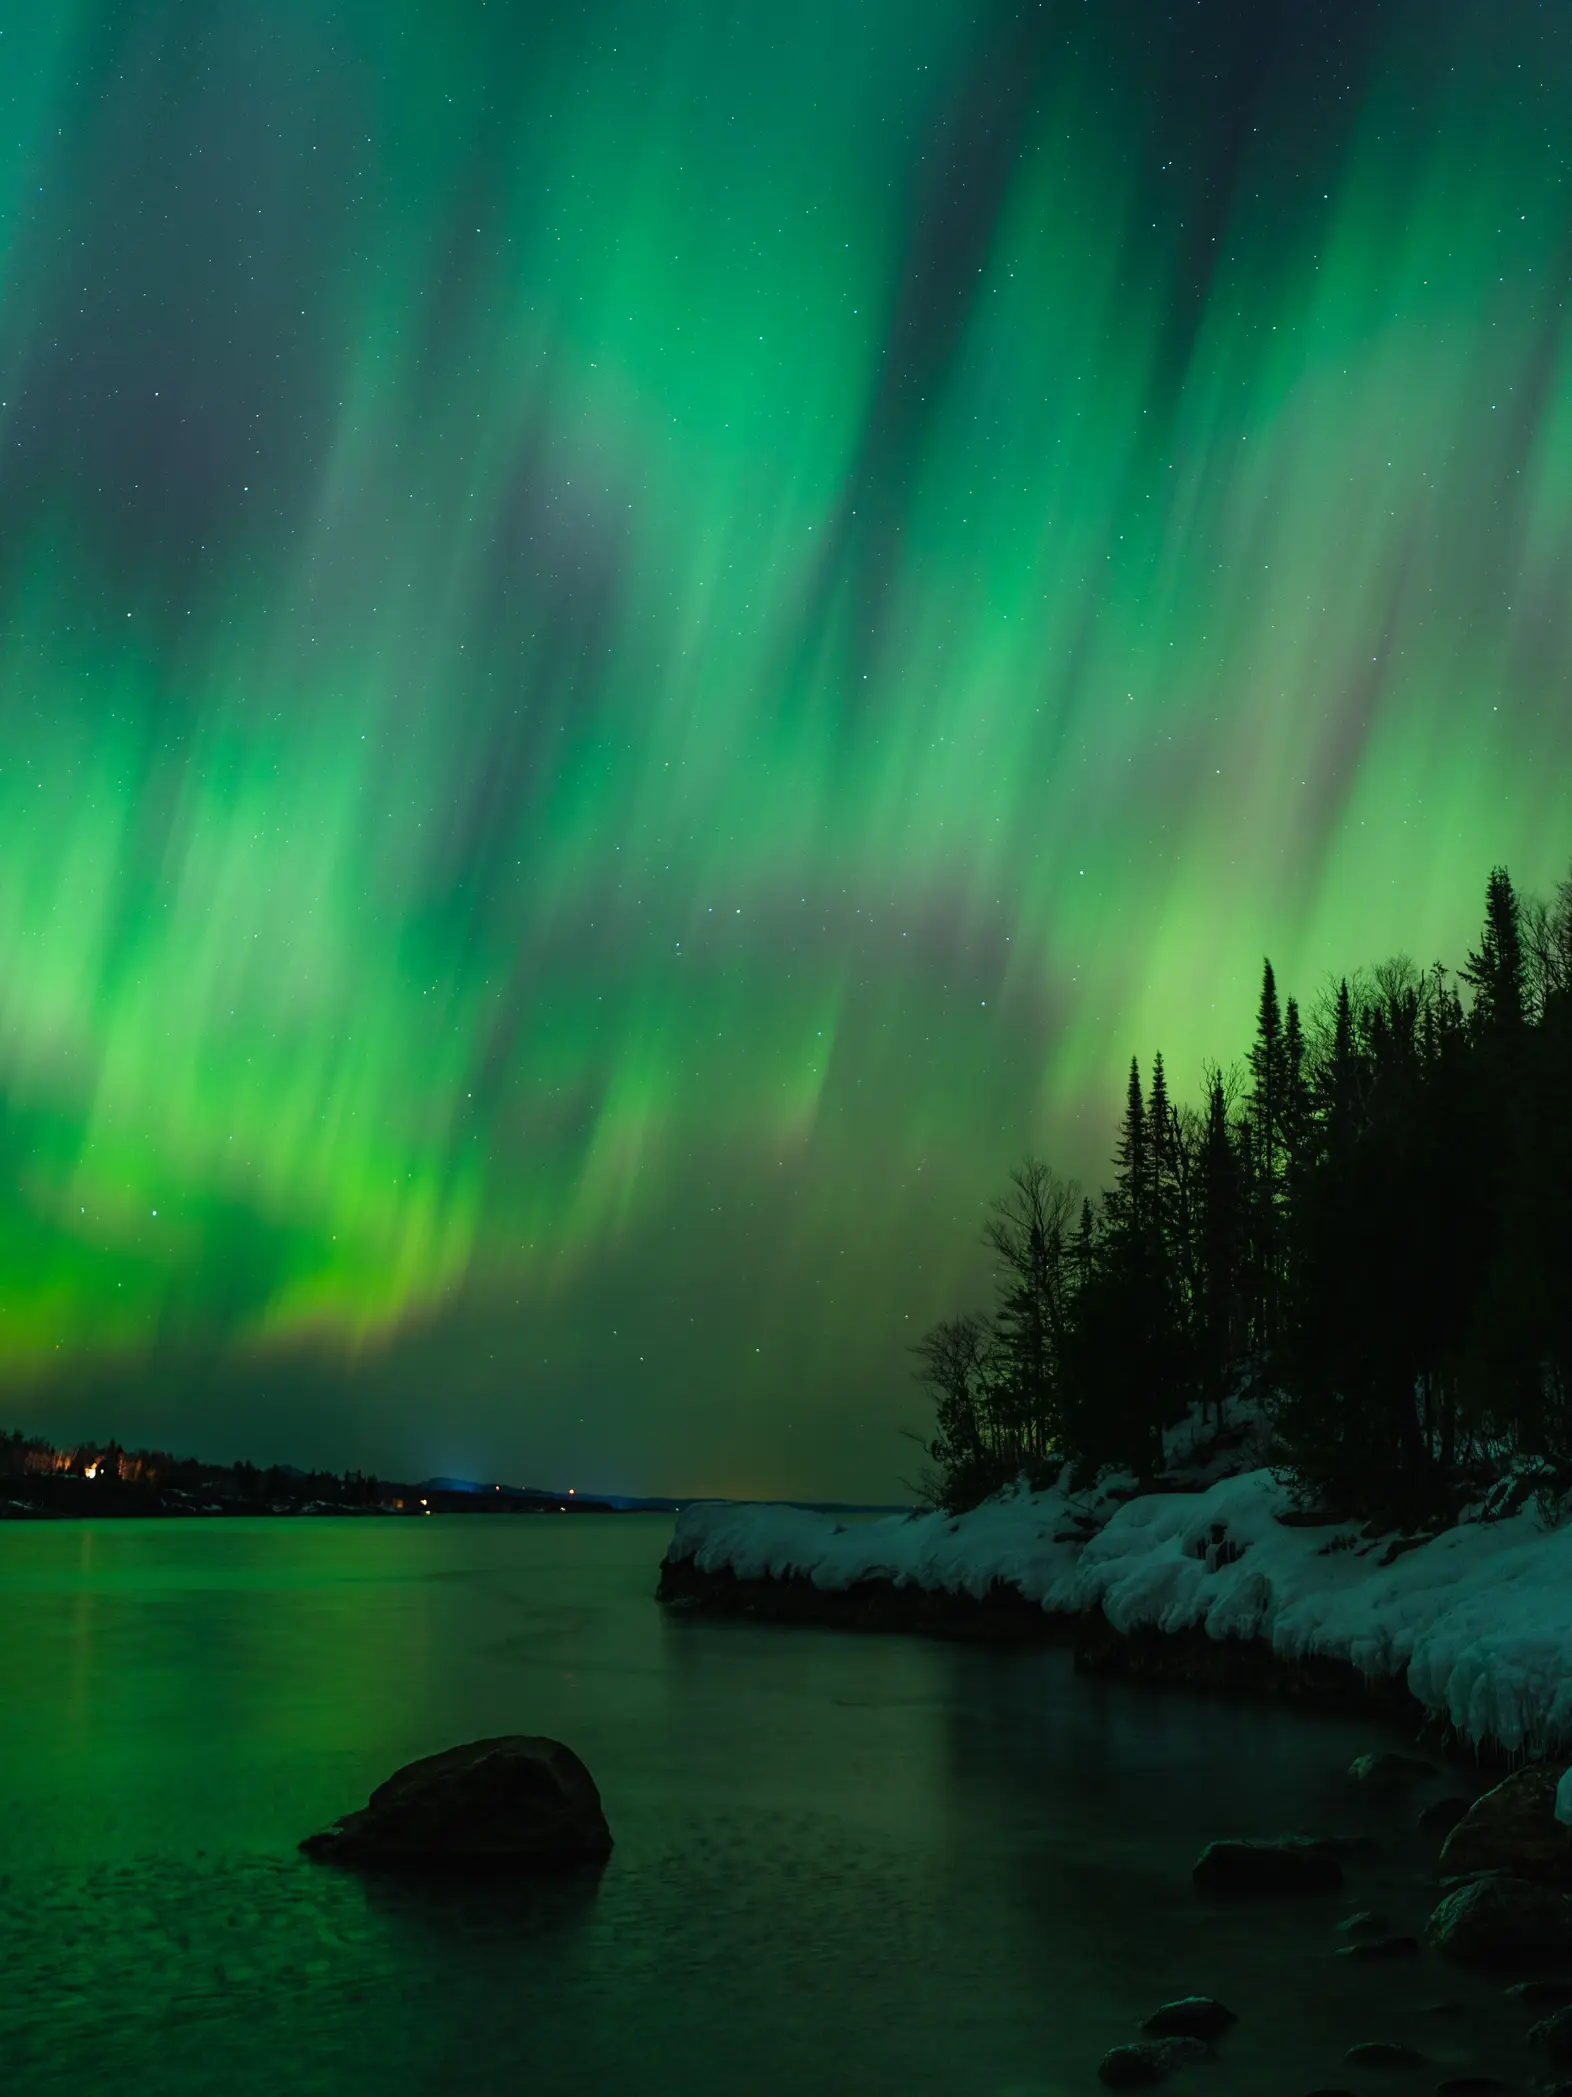 aurora borealis: The science behind the captivating Northern